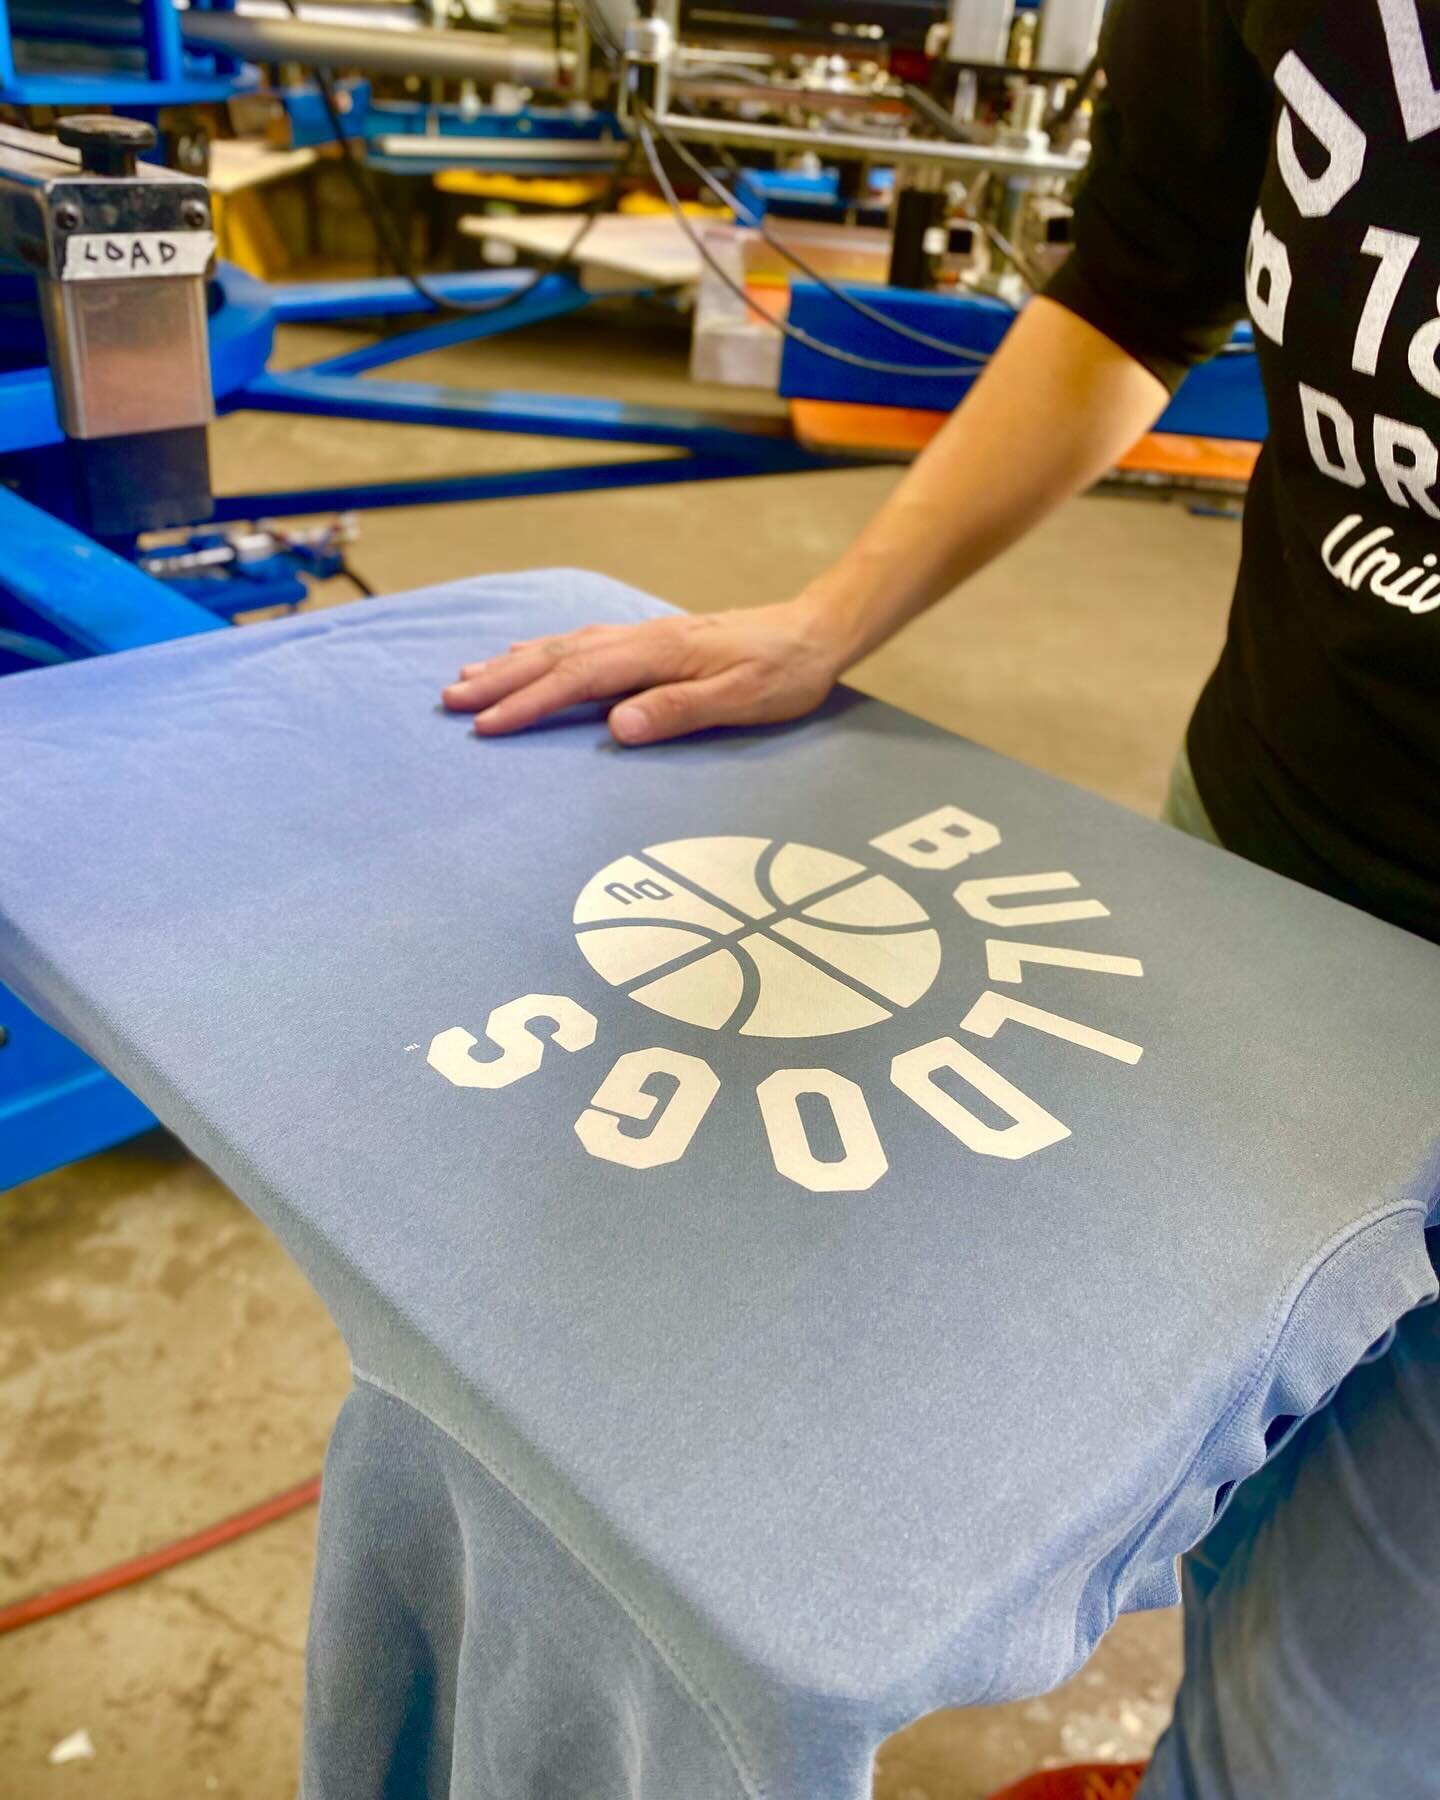 Headed to Omaha today to watch @drakembb? Scoop up one of these fresh vintage crewnecks we printed for the @drakebulldogshop pop-up store 🤙🏻 Go Bulldogs! 💙